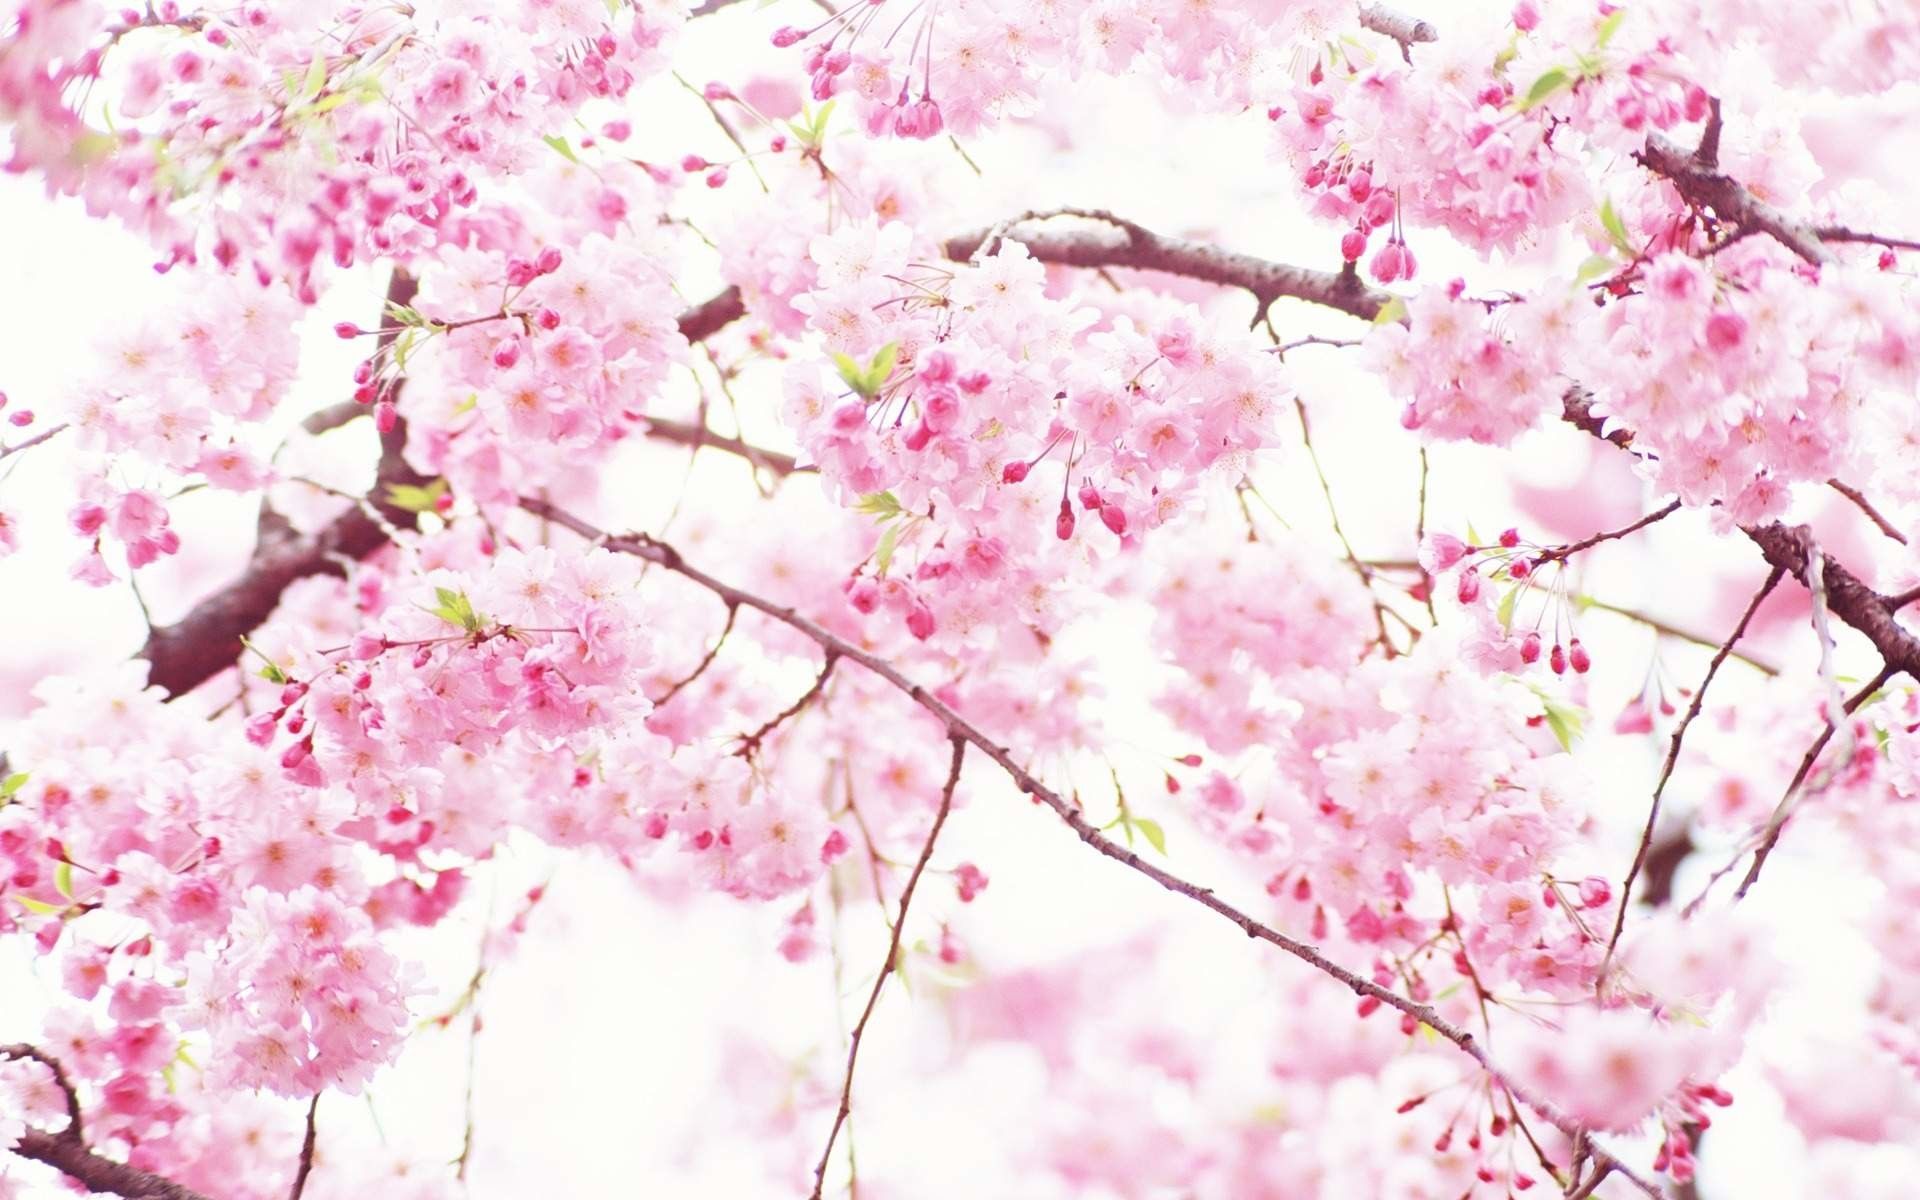 Pink Floral Wallpapers